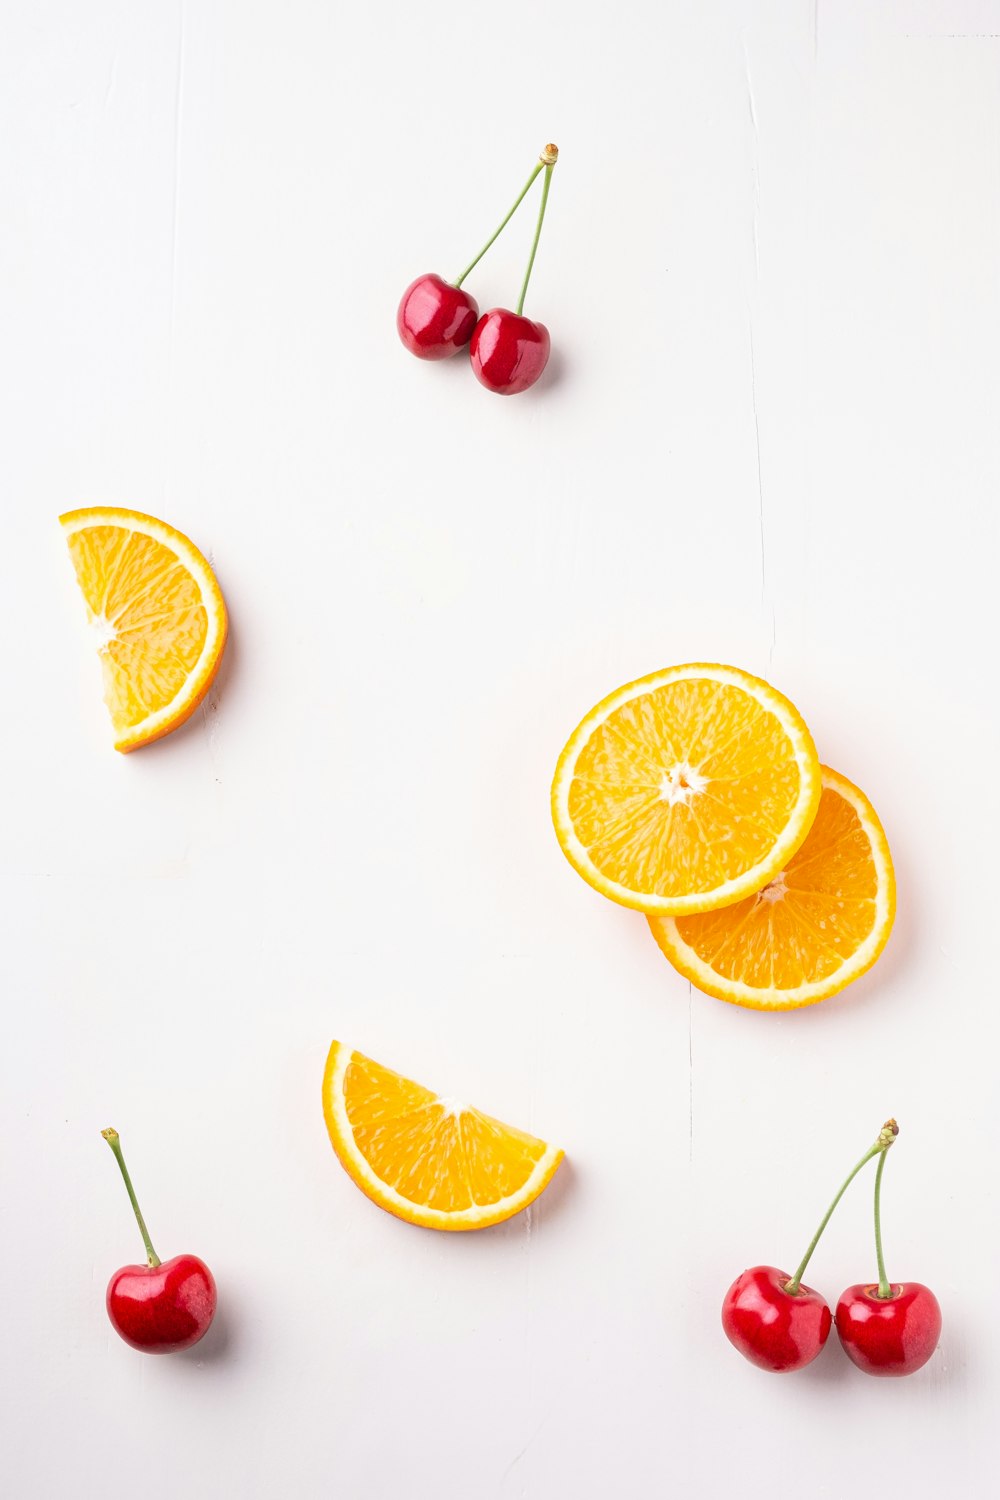 orange slices and cherries on a white surface